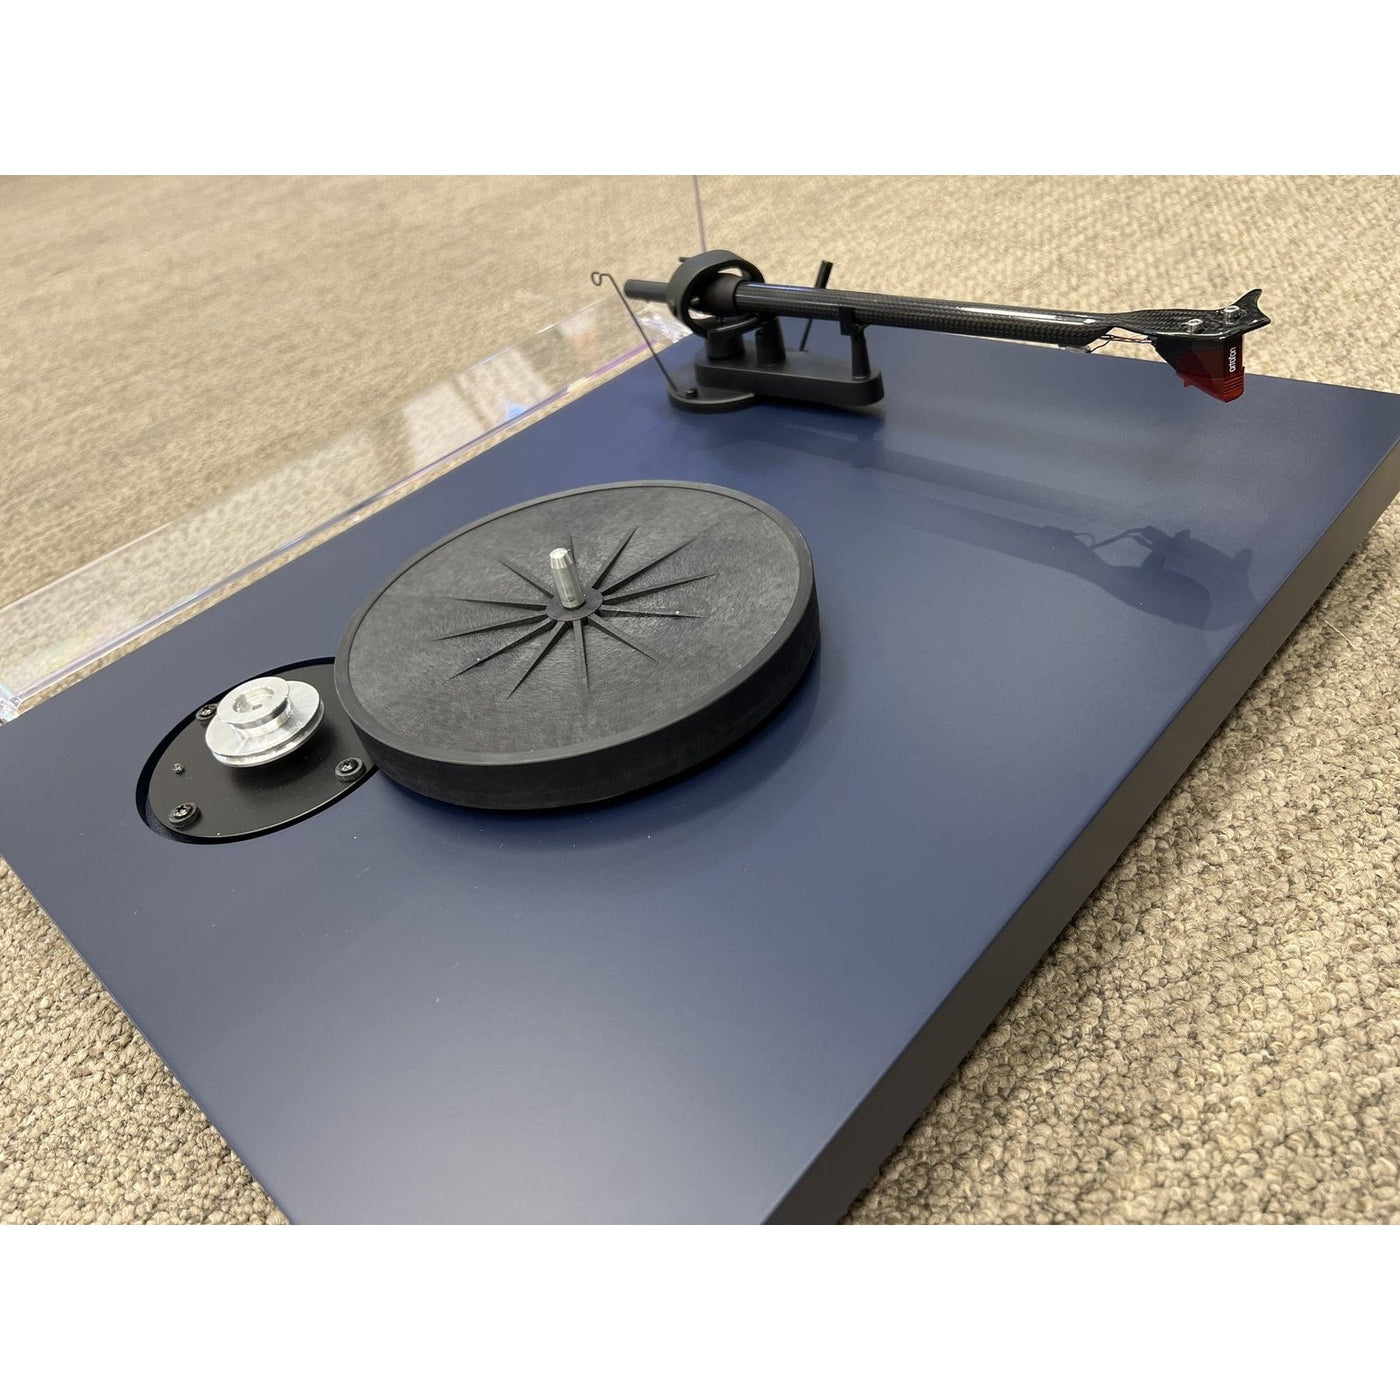 Pro-Ject Pro-Ject Debut Carbon Evo Turntable with Ortofon 2M Red Cartridge Satin Blue - Open Box Turntables